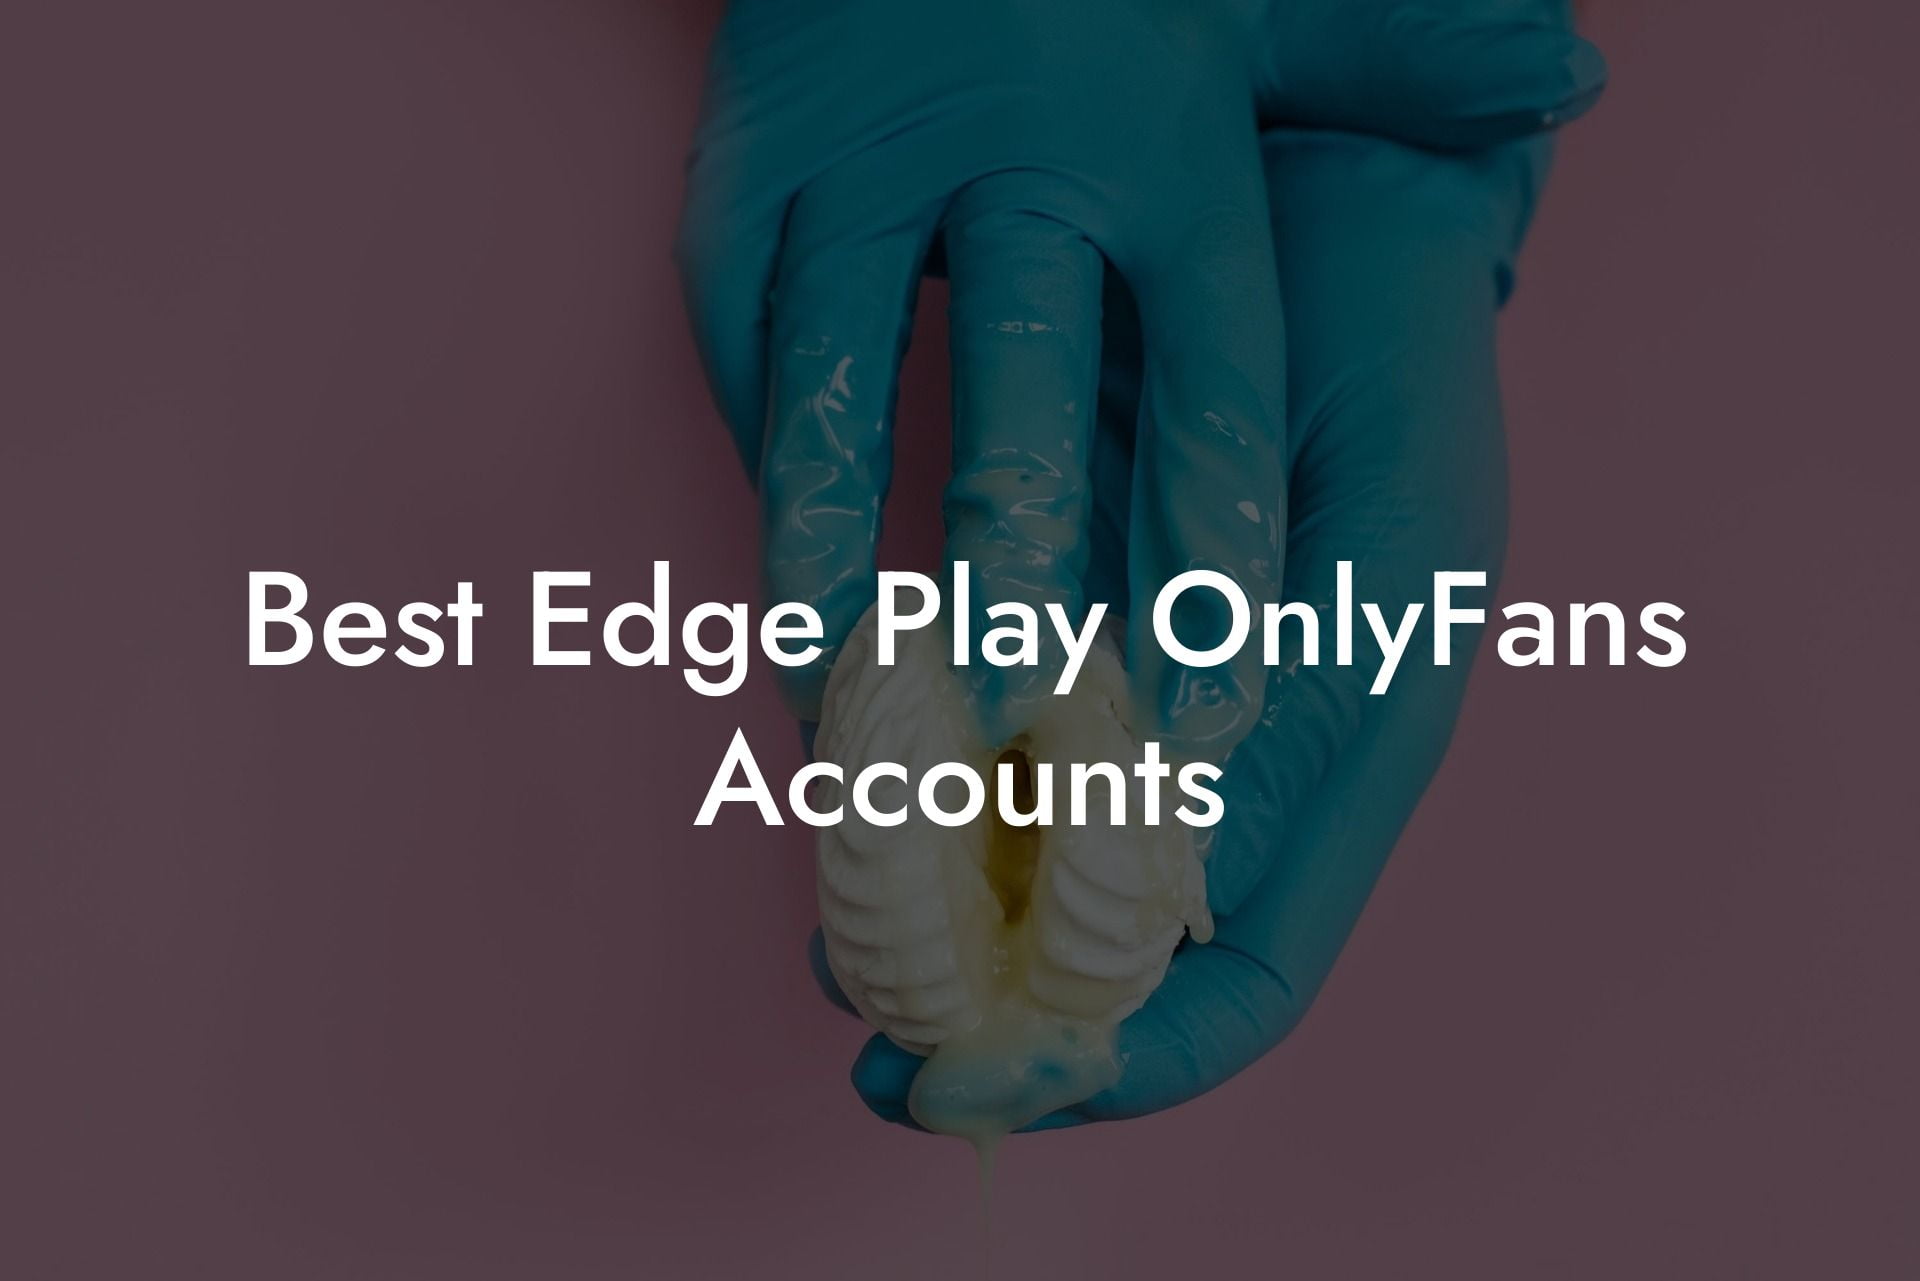 Best Edge Play OnlyFans Accounts